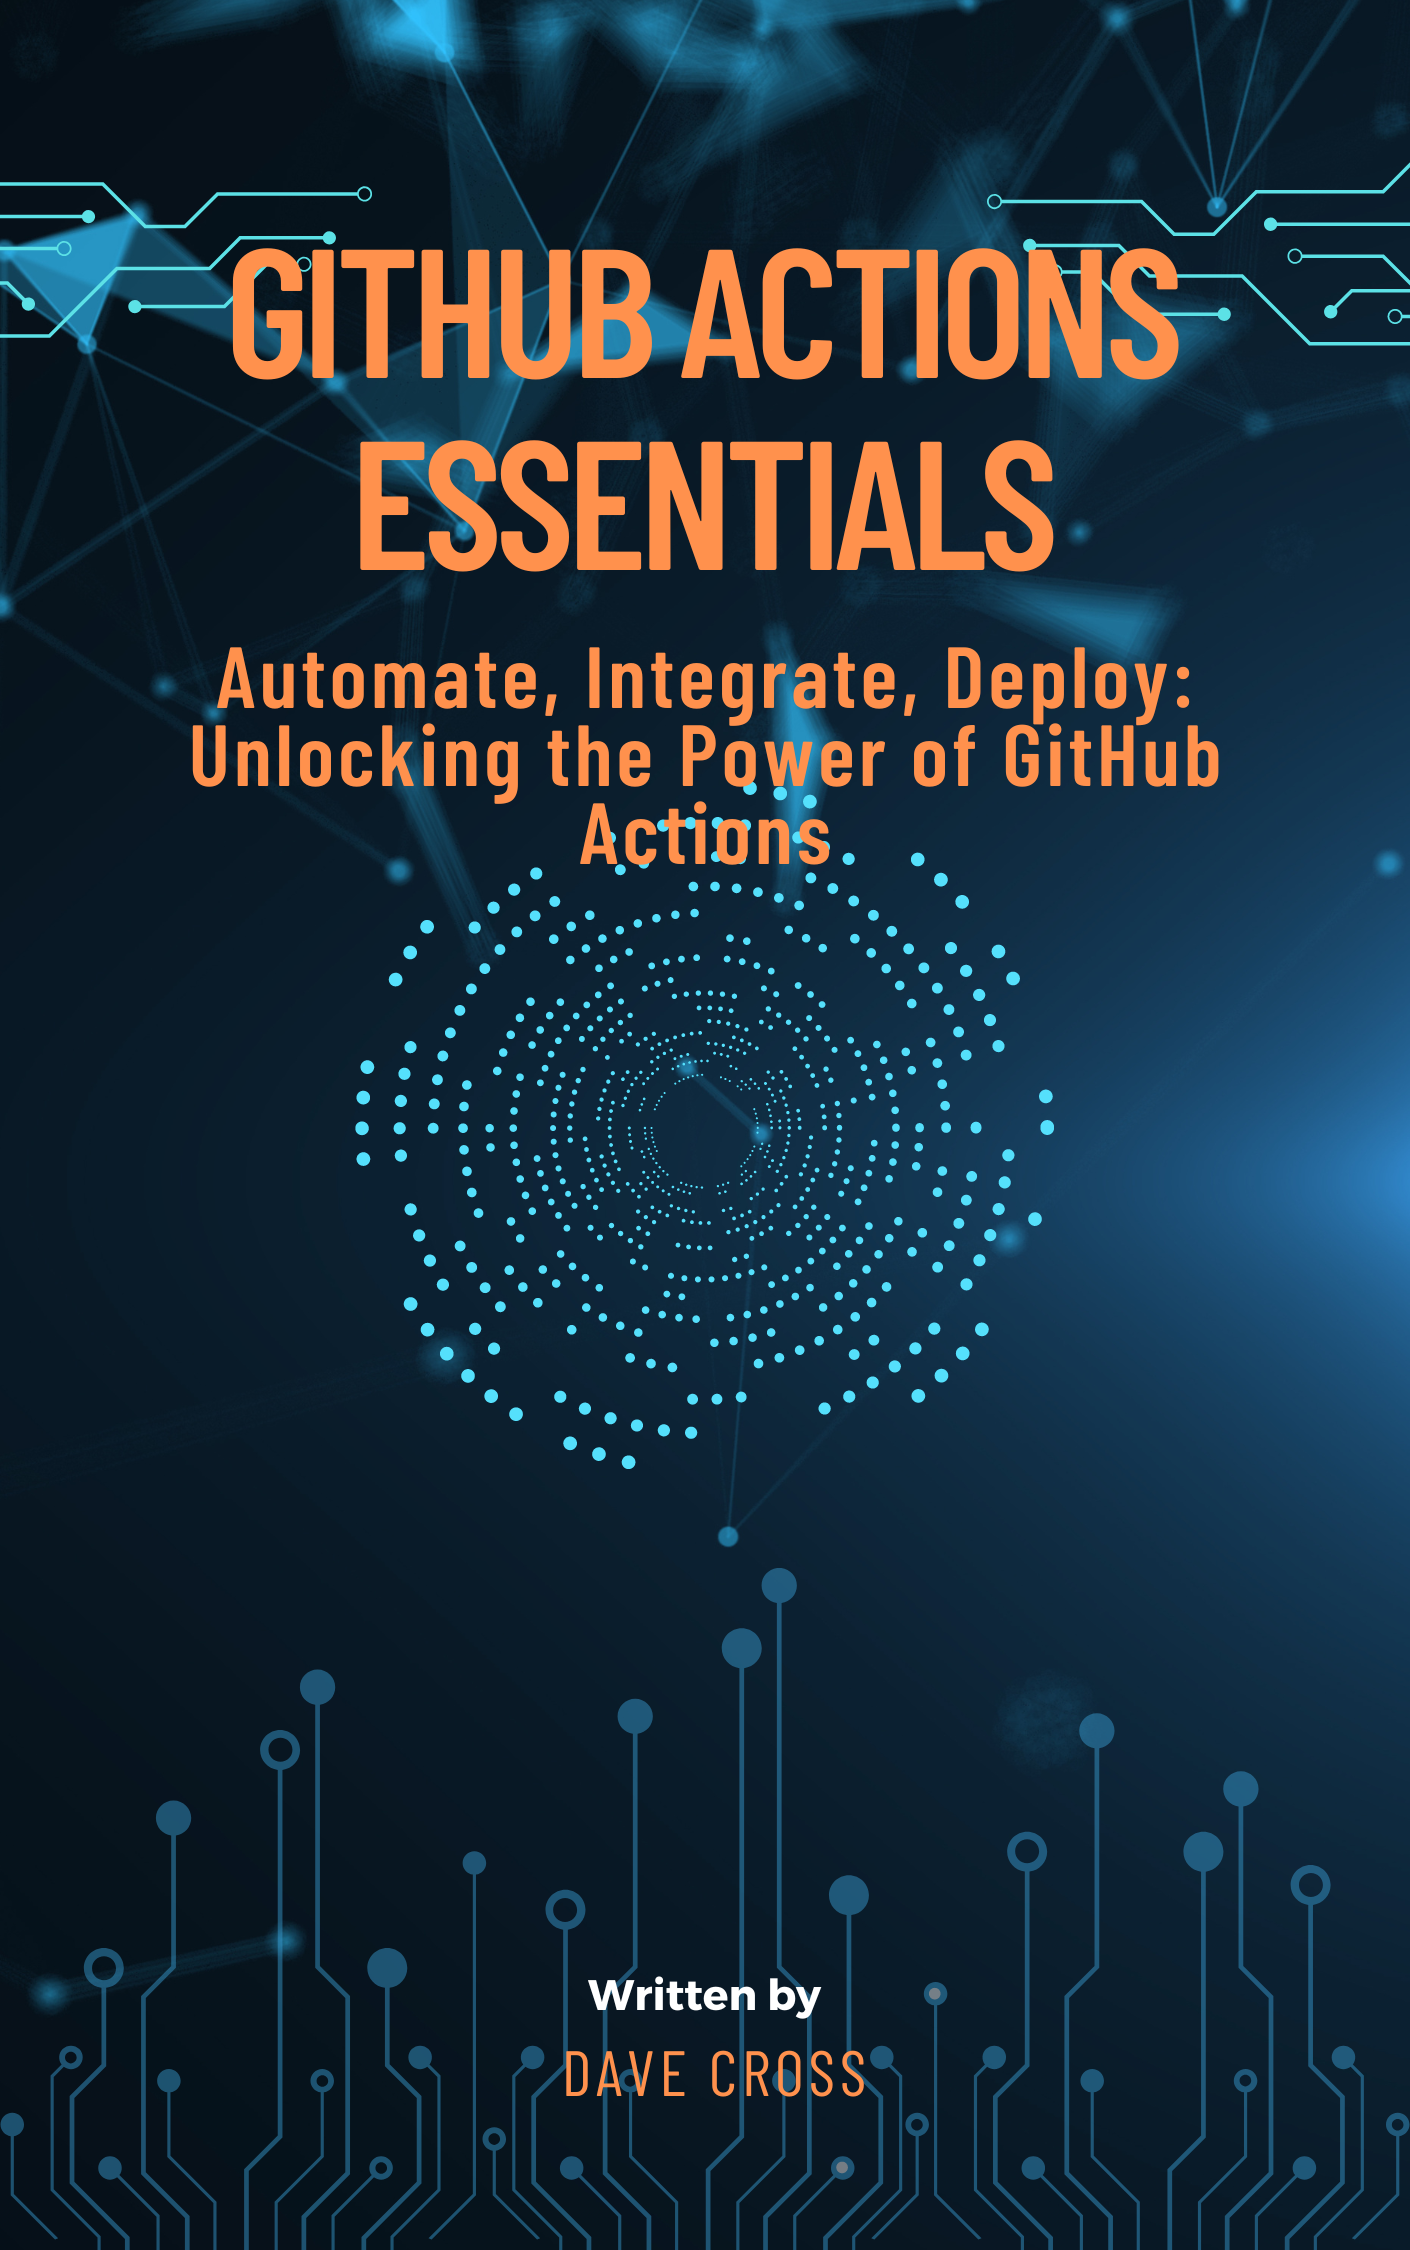 GitHub Actions Essentials Book Cover